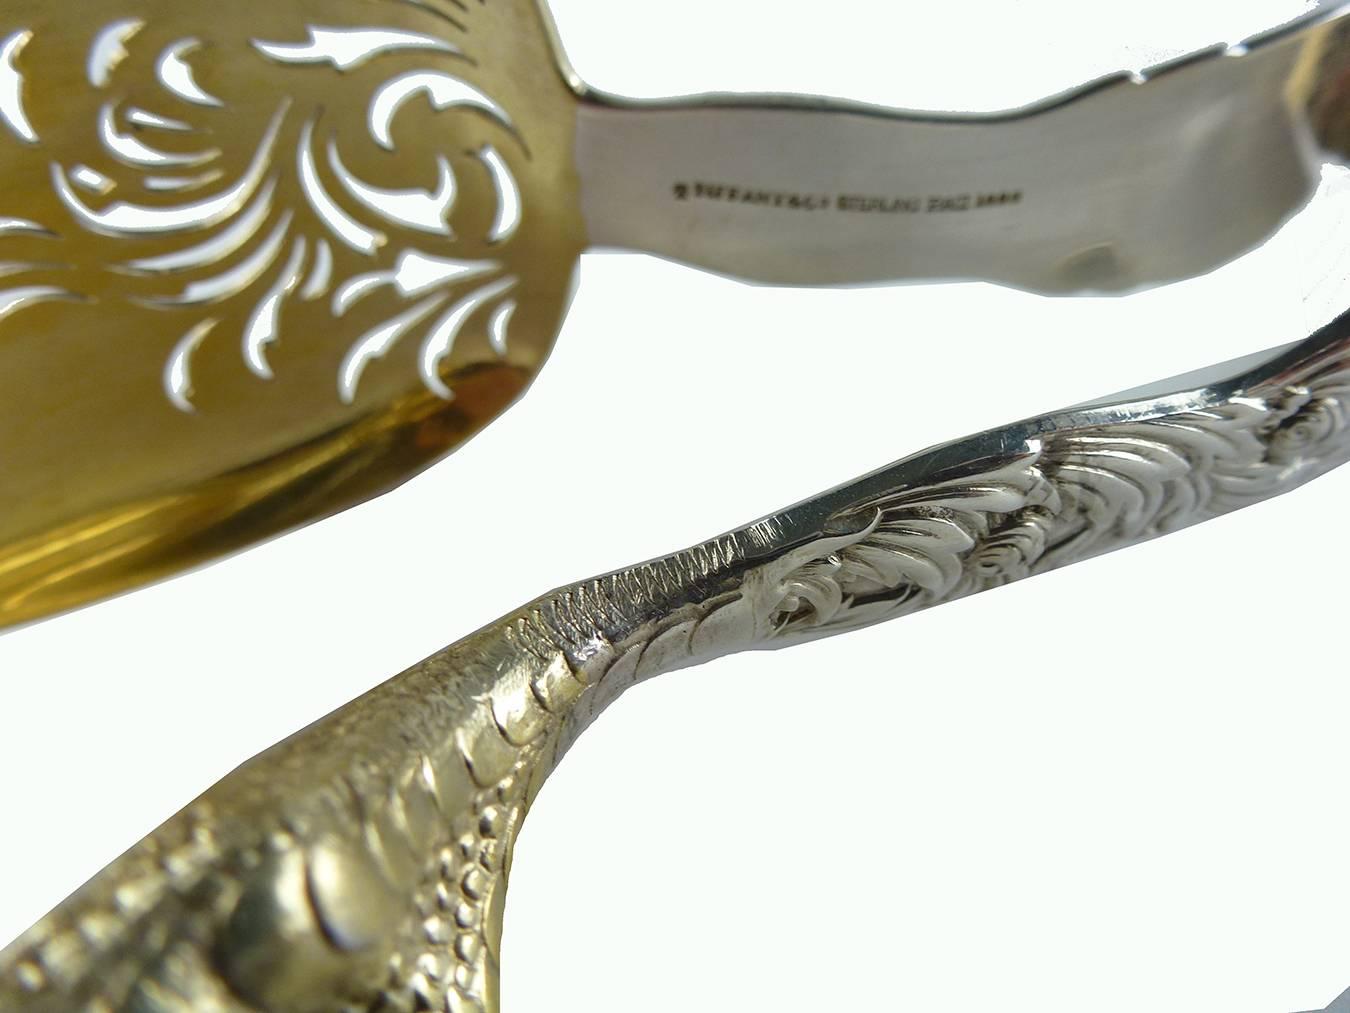 American Tiffany & Co. sterling silver pair of ice tongs chrysanthemum pattern.

Tiffany sterling silver gold-washed pair of ice tongs, with the distinctive 